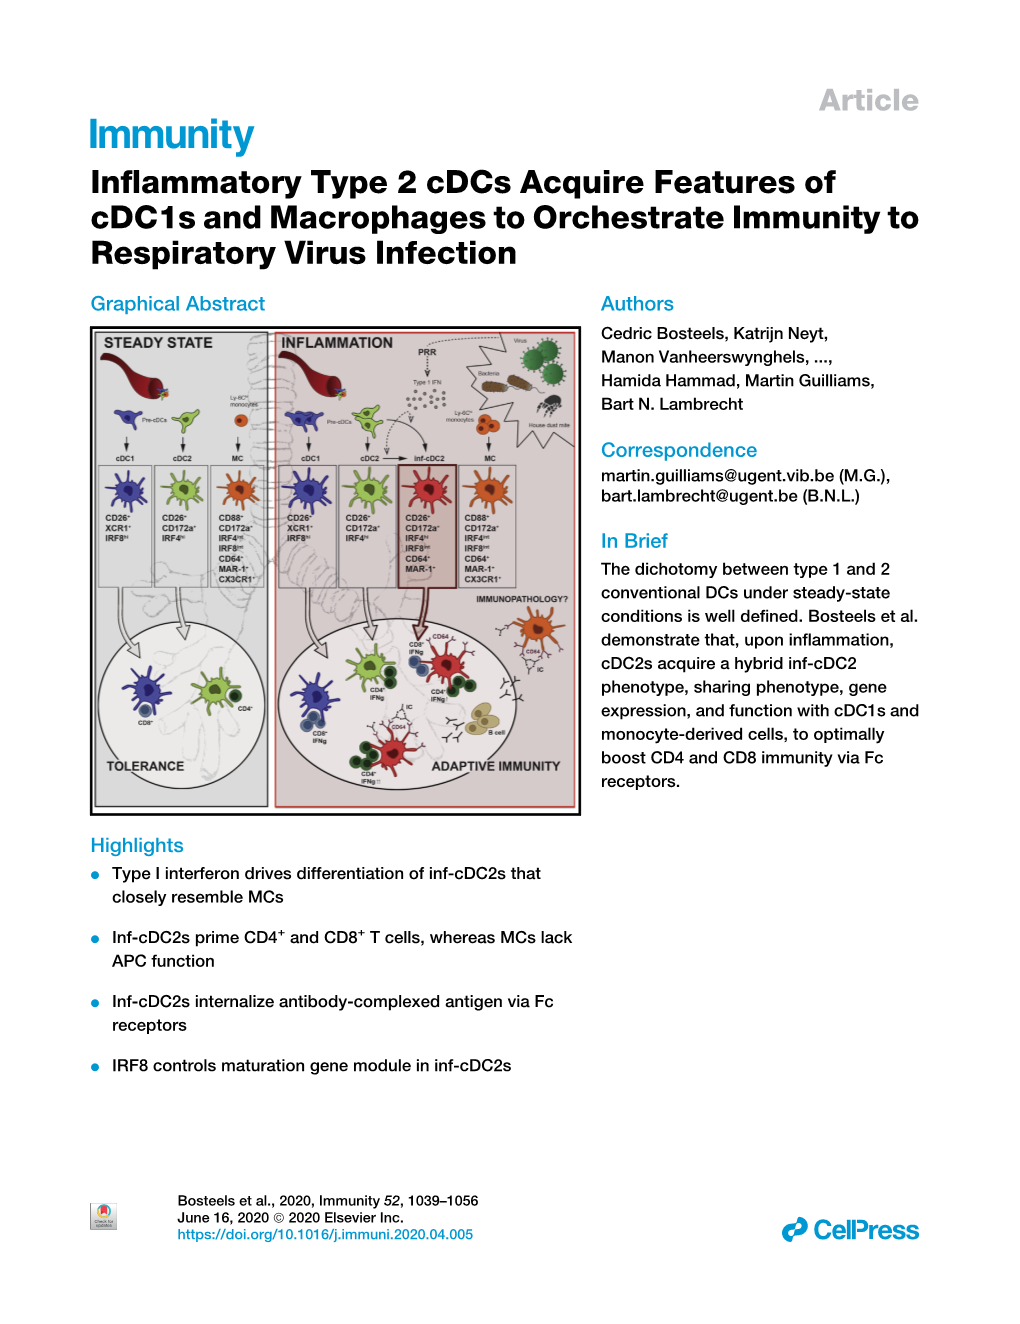 Inflammatory Type 2 Cdcs Acquire Features of Cdc1s and Macrophages to Orchestrate Immunity to Respiratory Virus Infection